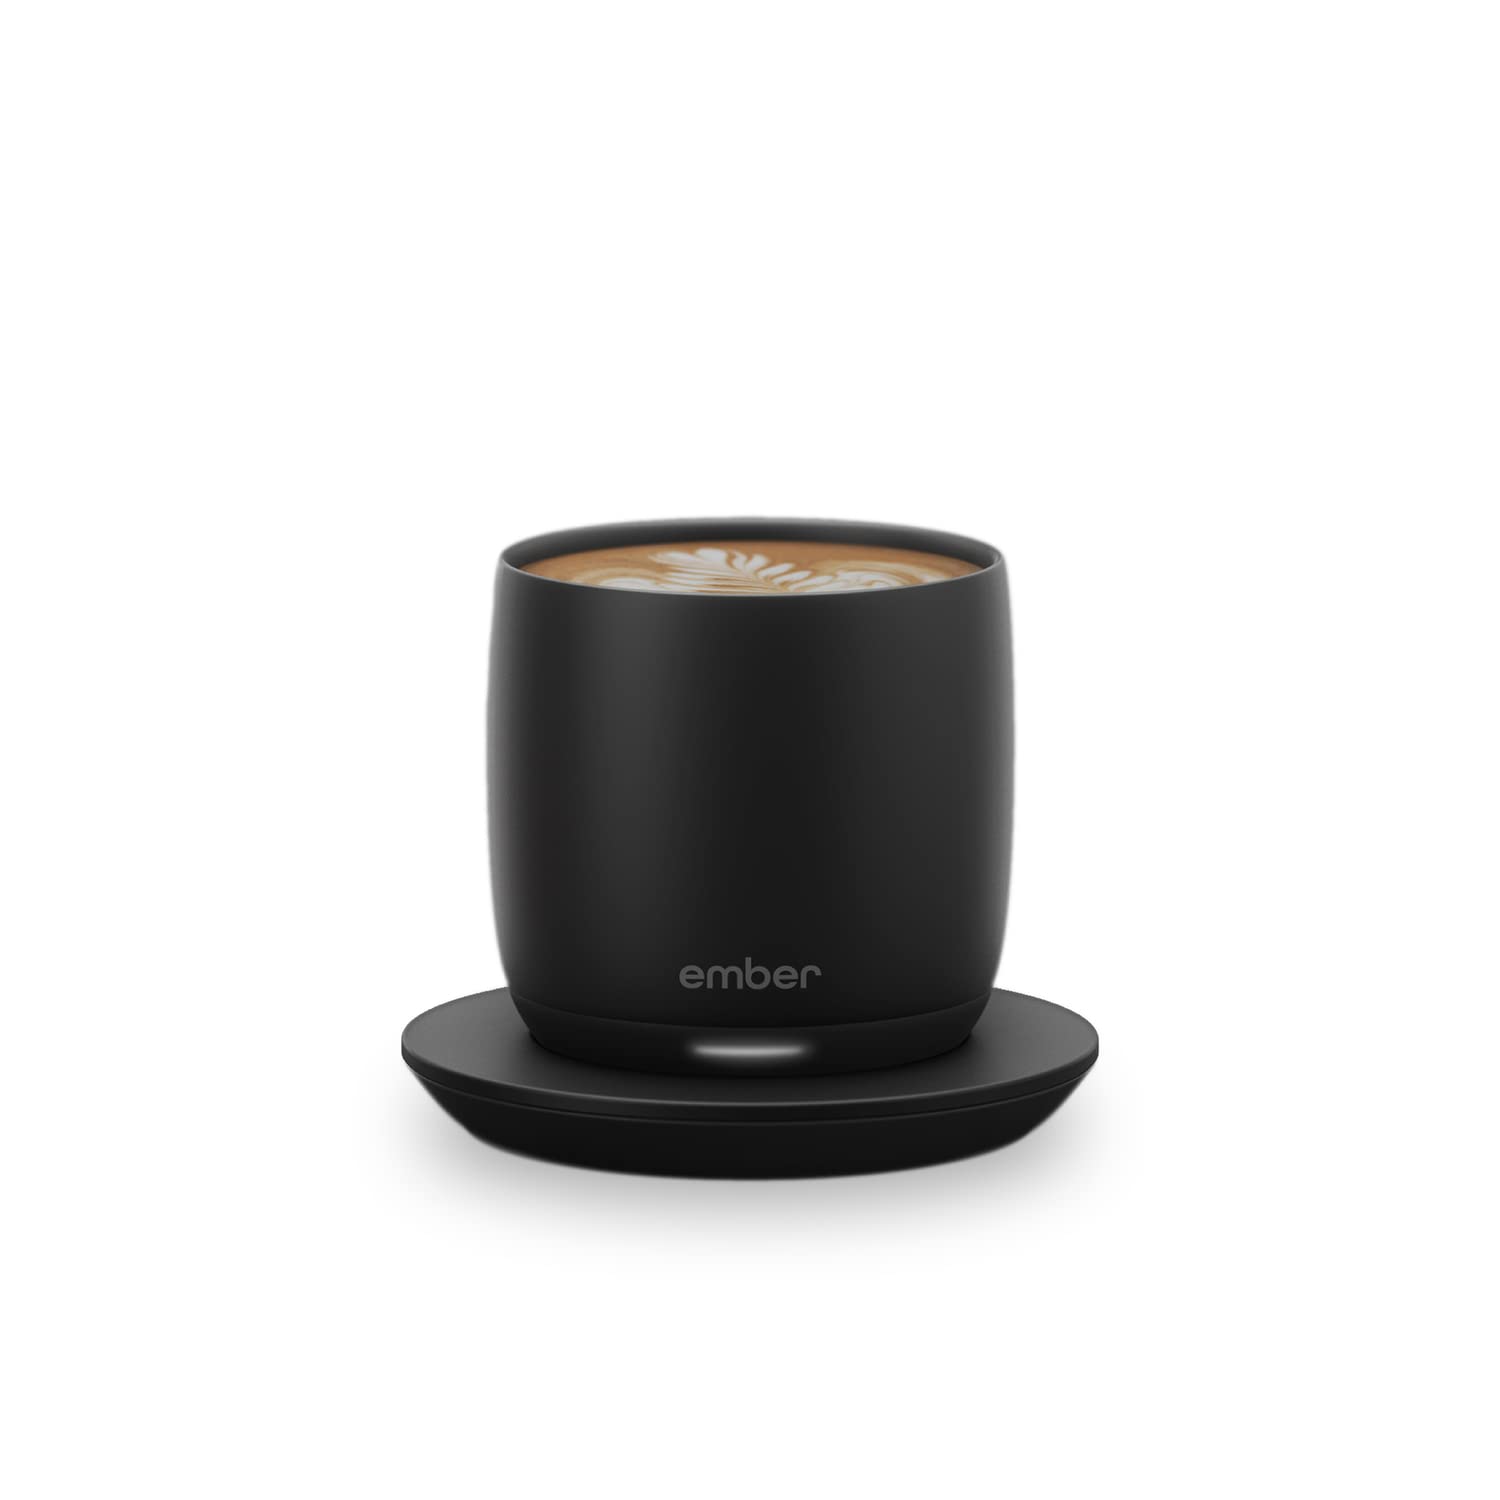 Ember - Temperature Control Smart Cup, 6 oz, App-Controlled Heated Coffee Cup, Espresso Mug with 90 Min Battery Life, Black